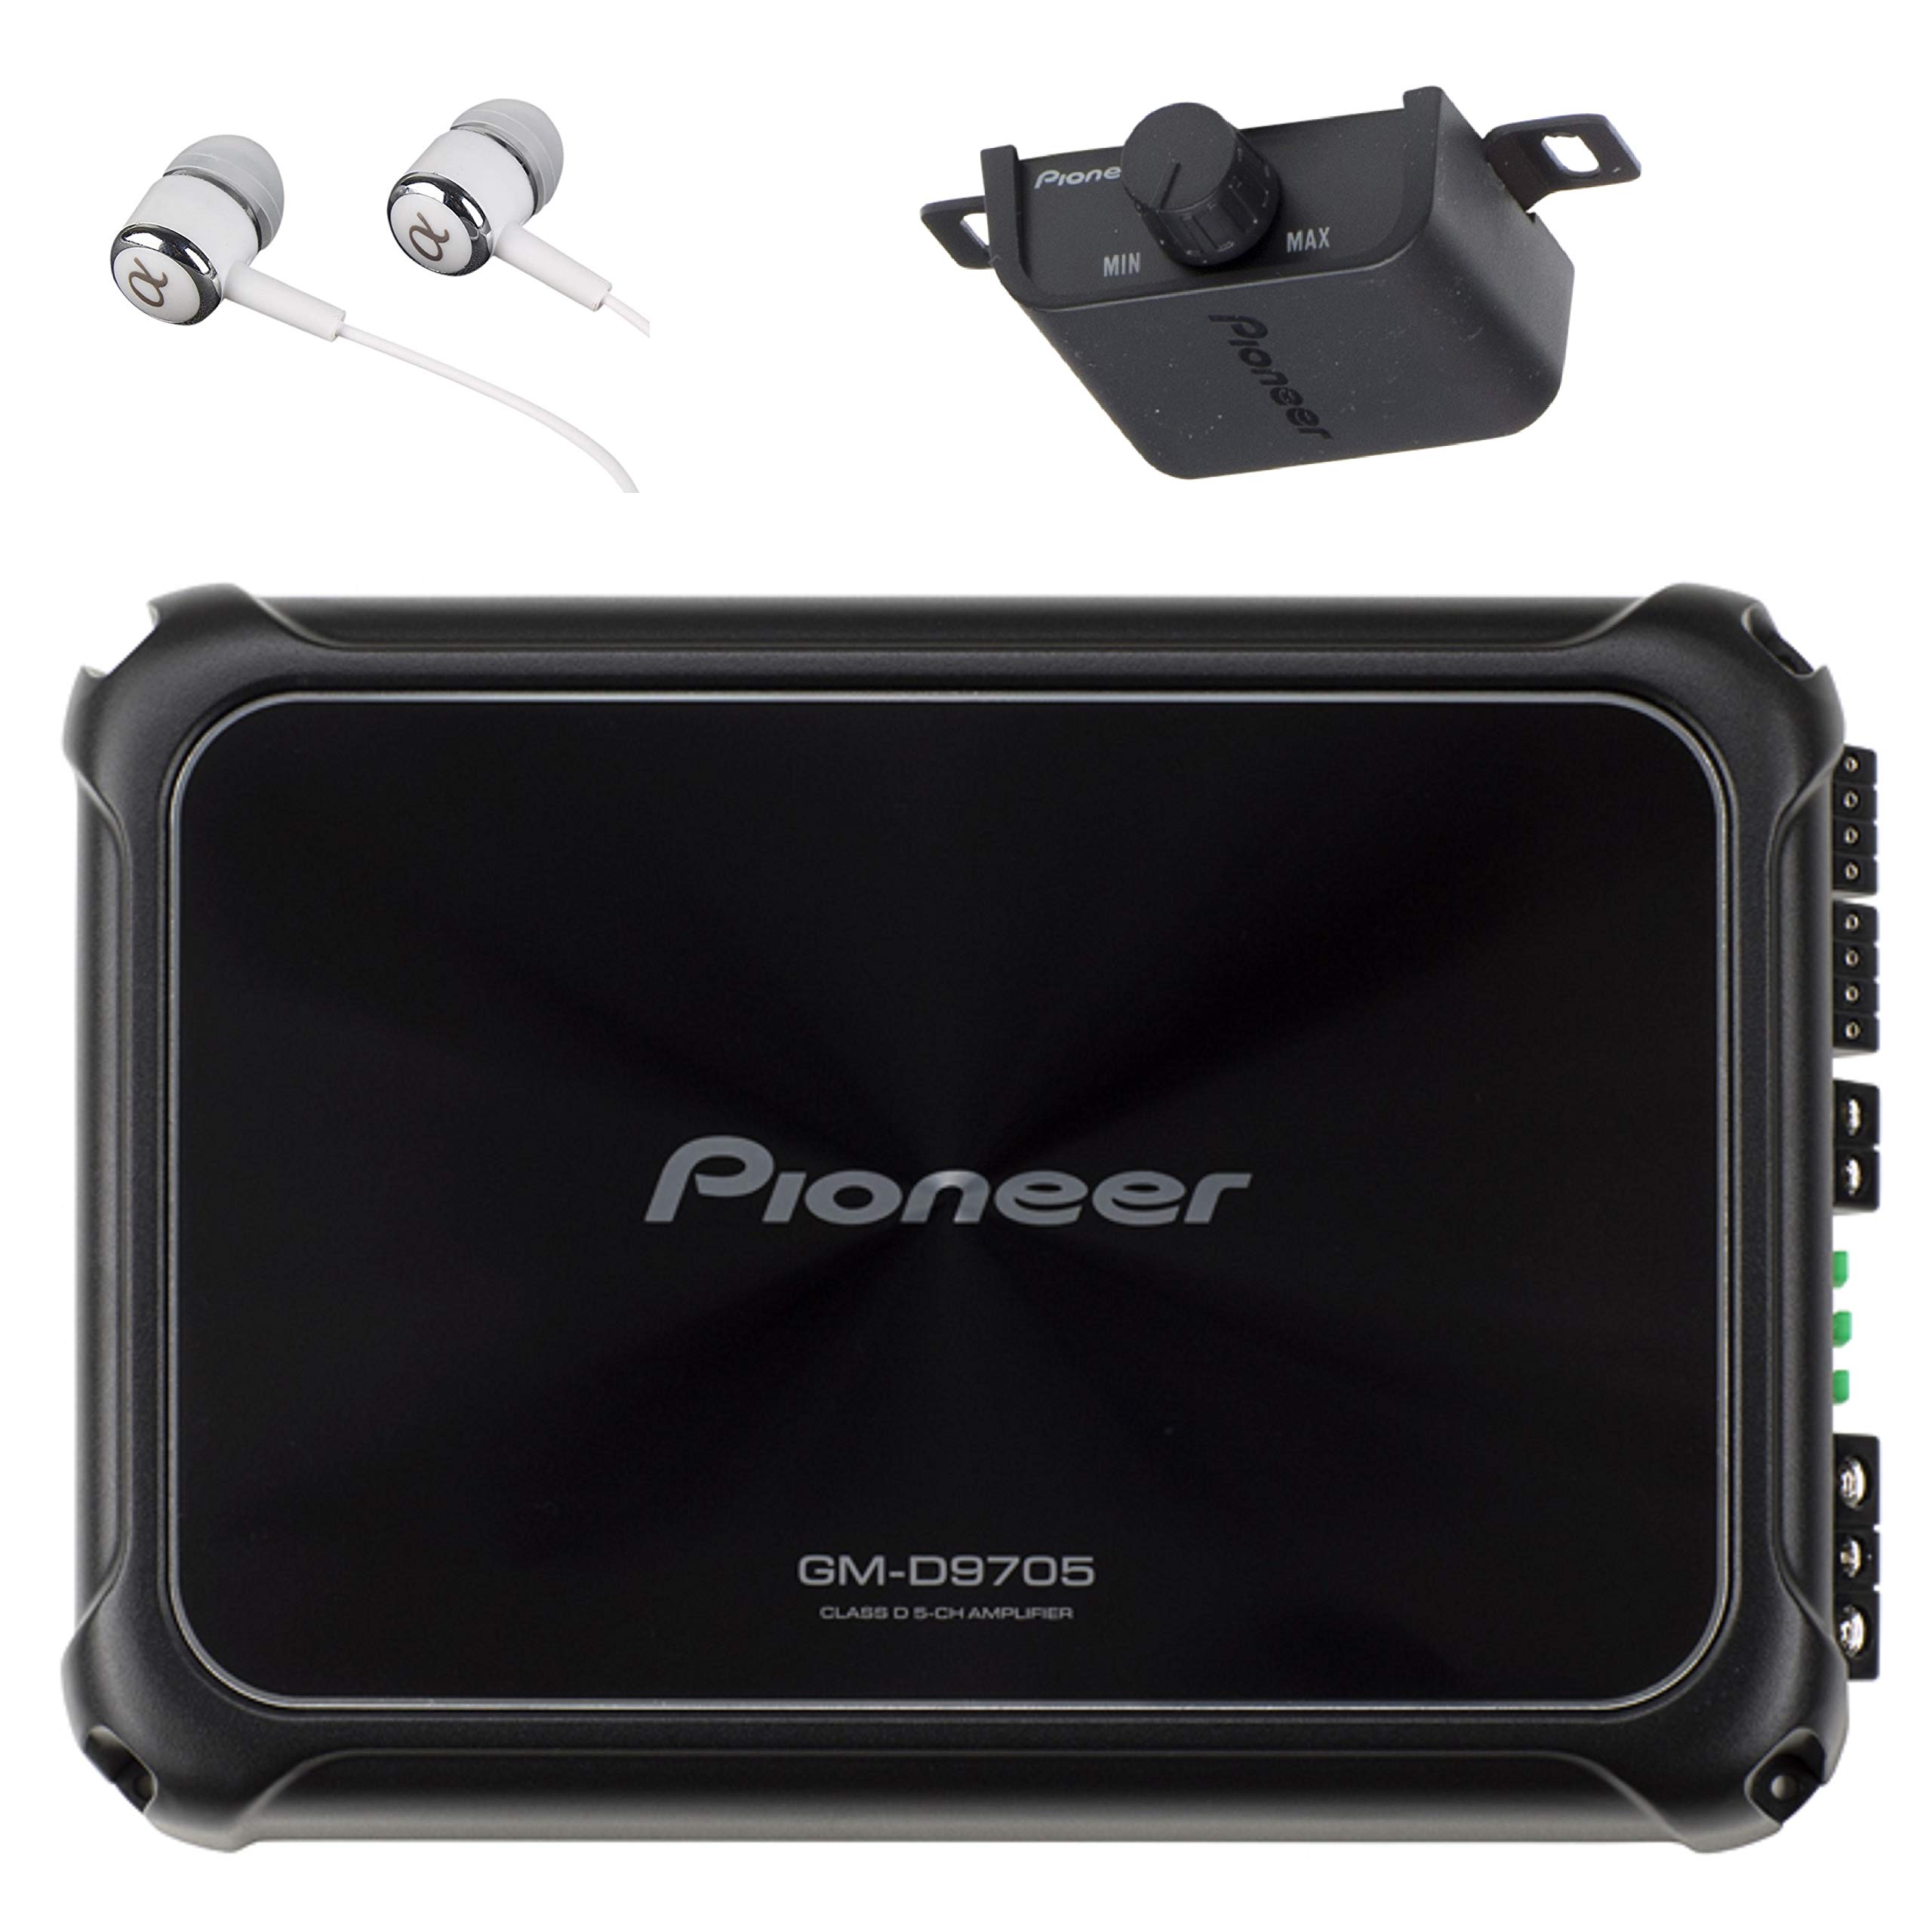 Pioneer GM-D9705 2000W Max 5-Channel GM Digital Champion Series Class-D Car Audio Stereo Amplifier w/ Wired Bass Boost Remote and Free Alphasonik Erabuds